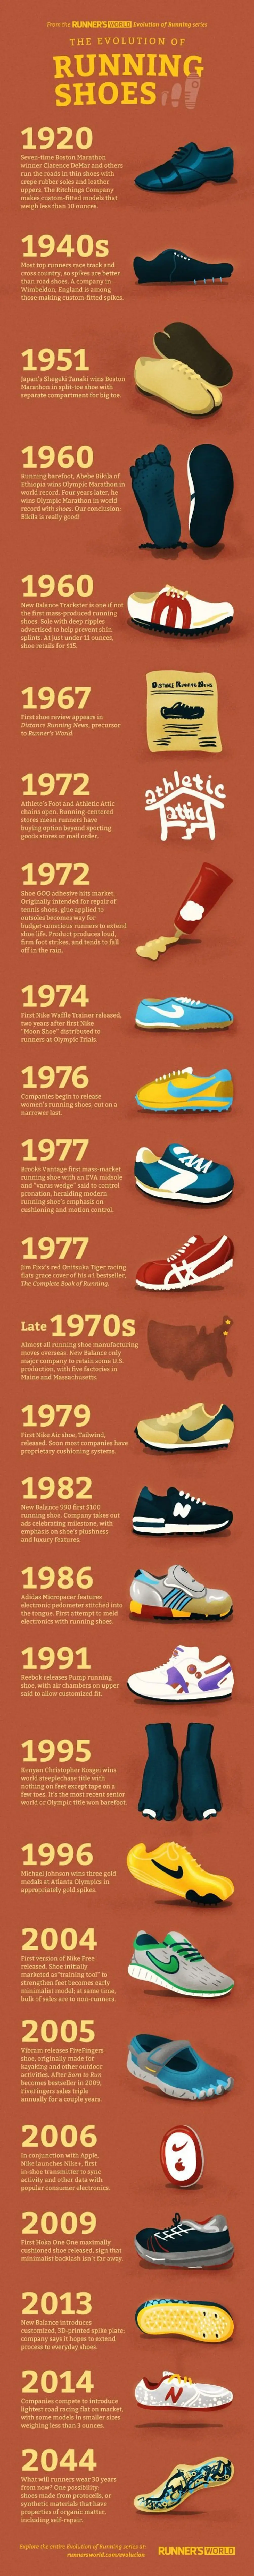 A Brief History of the Running Shoe